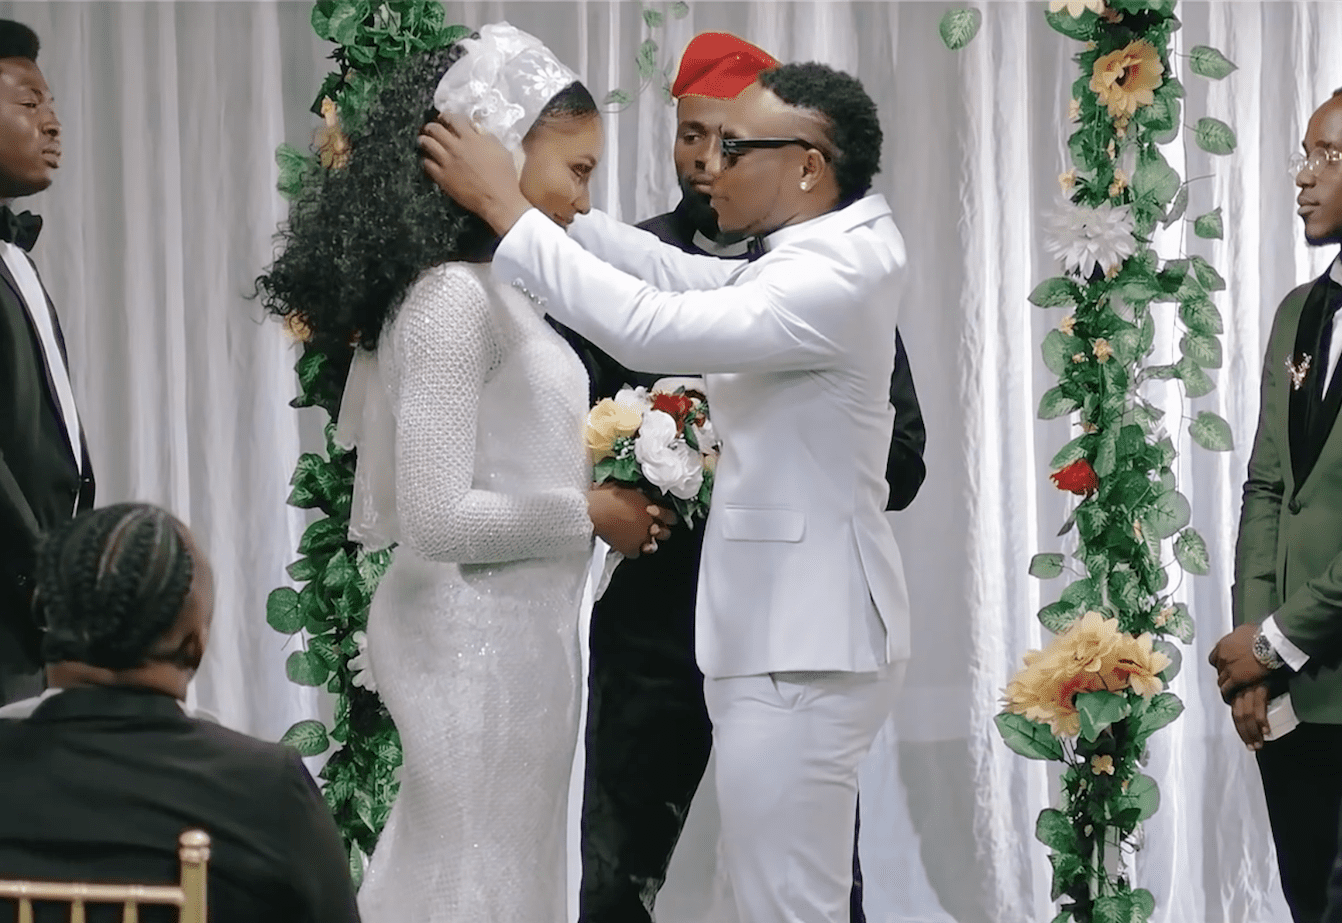 Watch L.A.X get married in his video for “Panana”